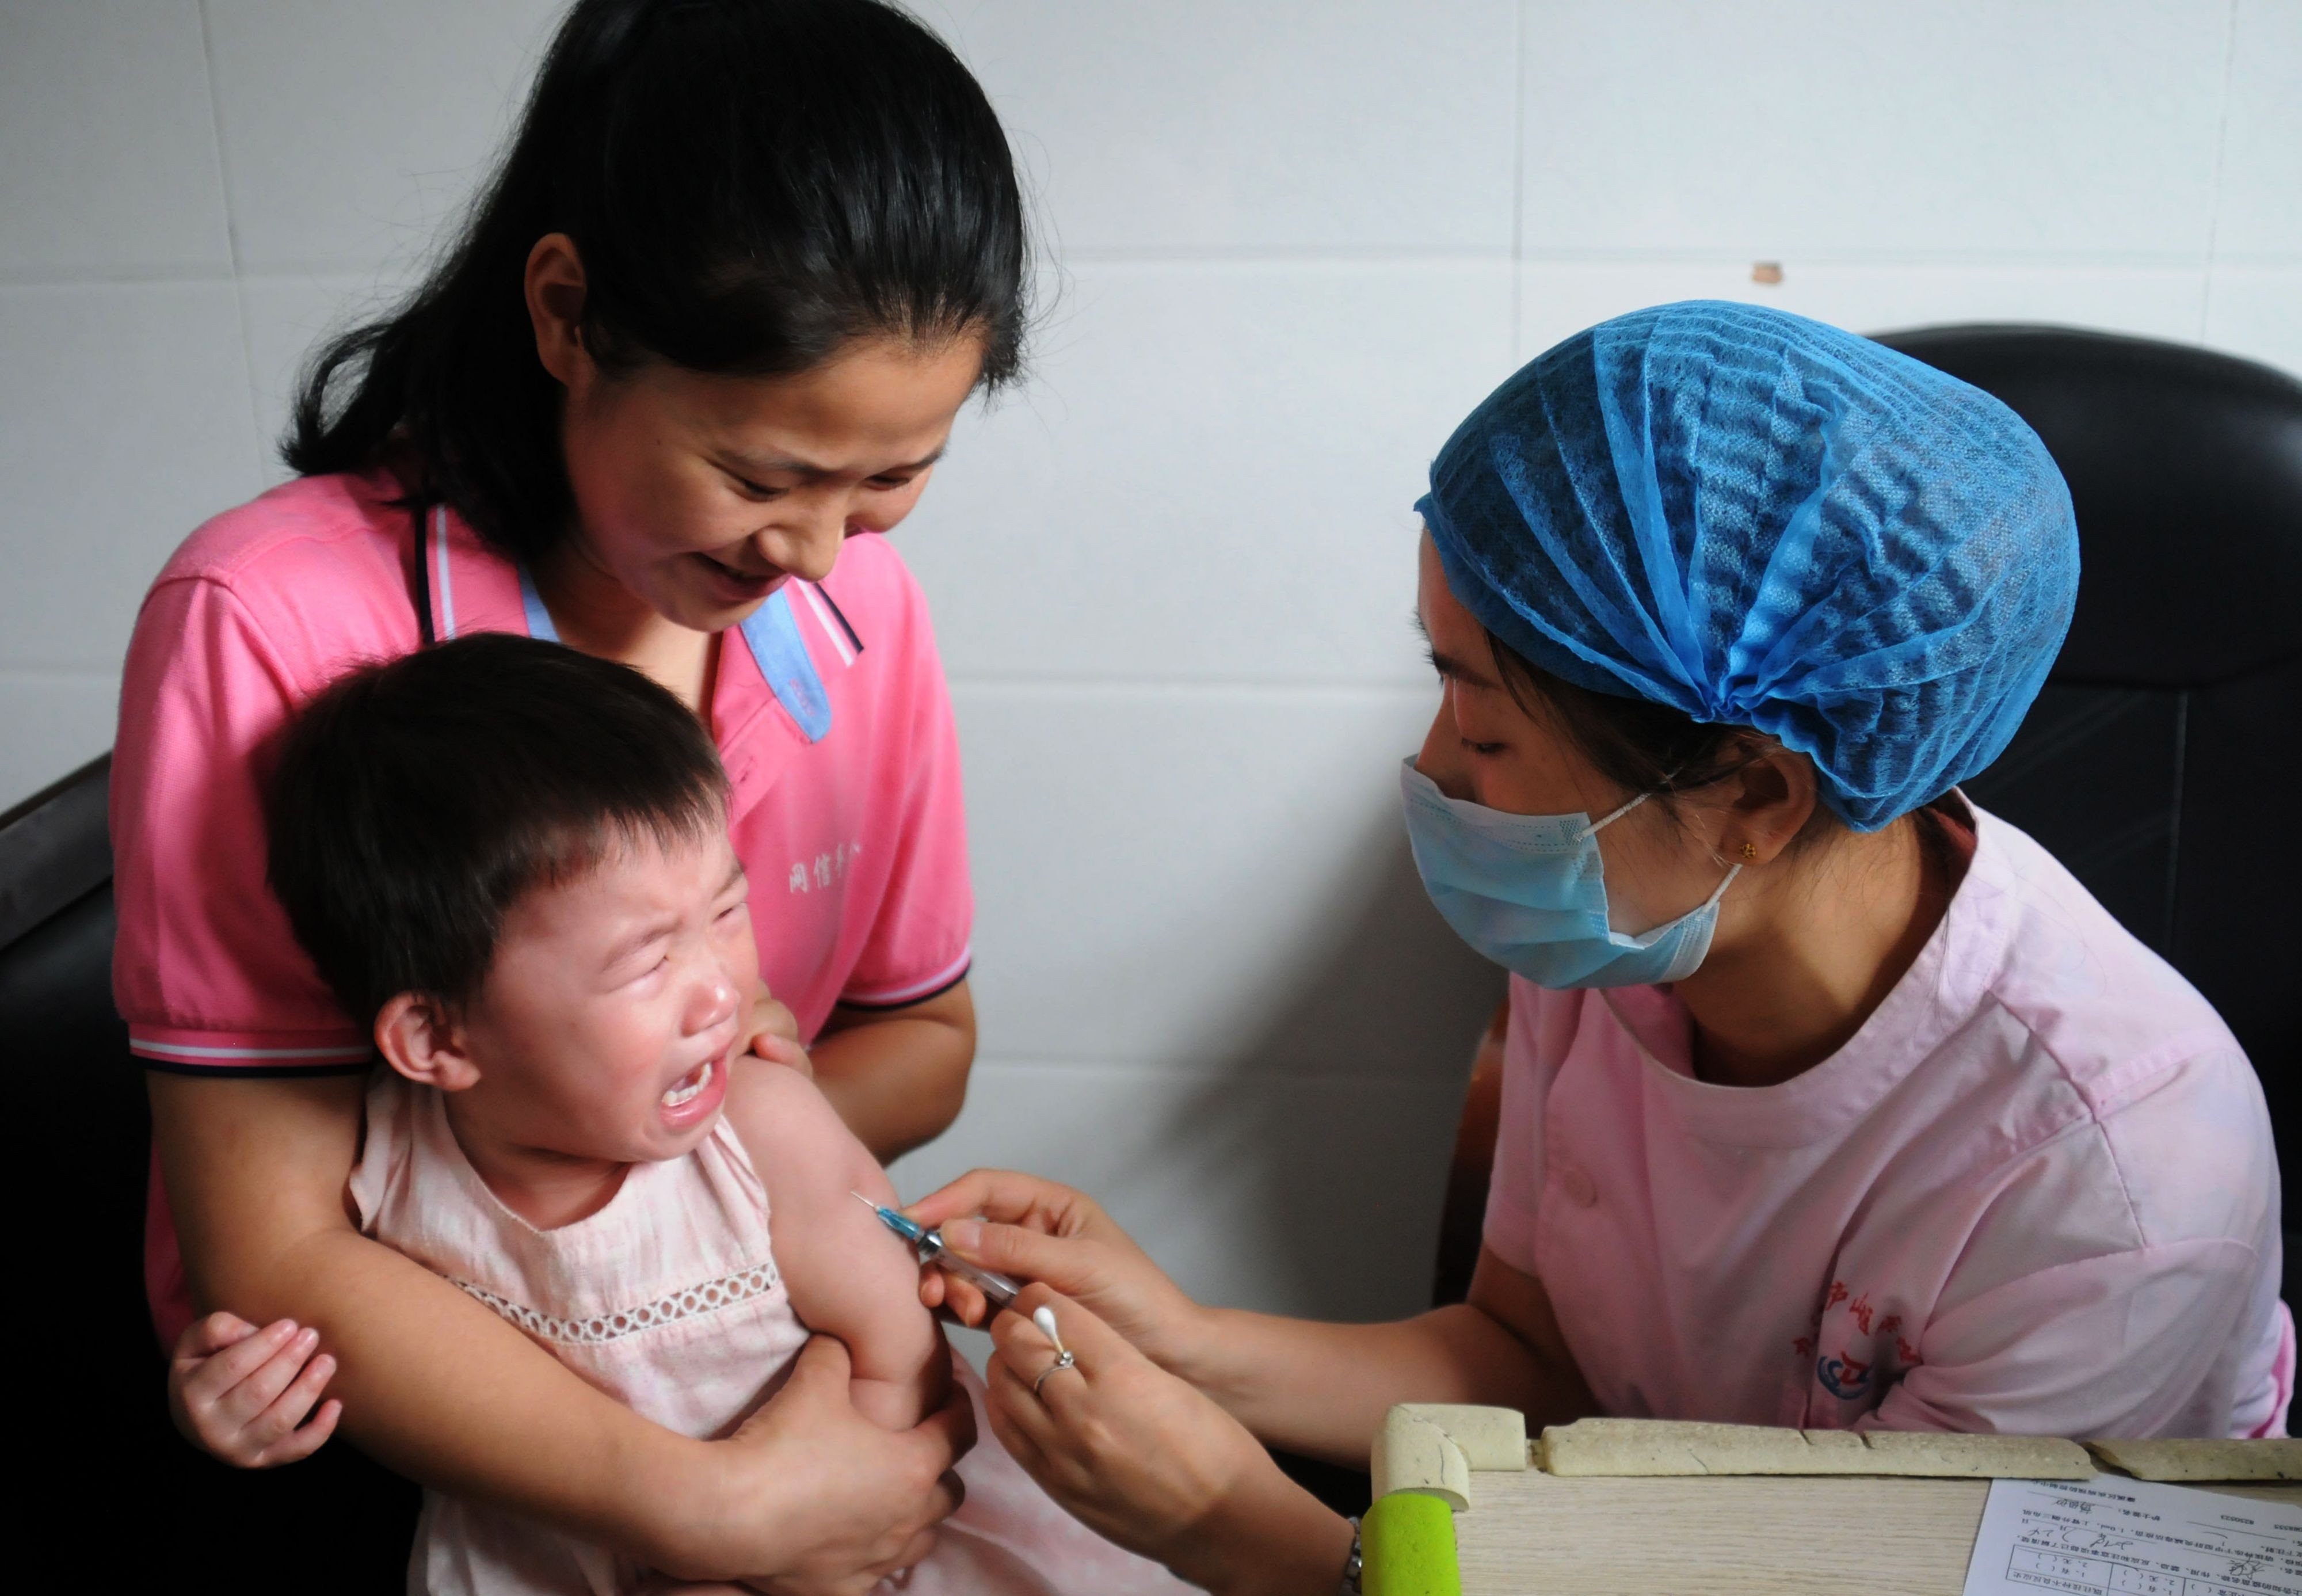 Chinese parents have been urged to have confidence in domestically produced vaccines. Photo: AFP